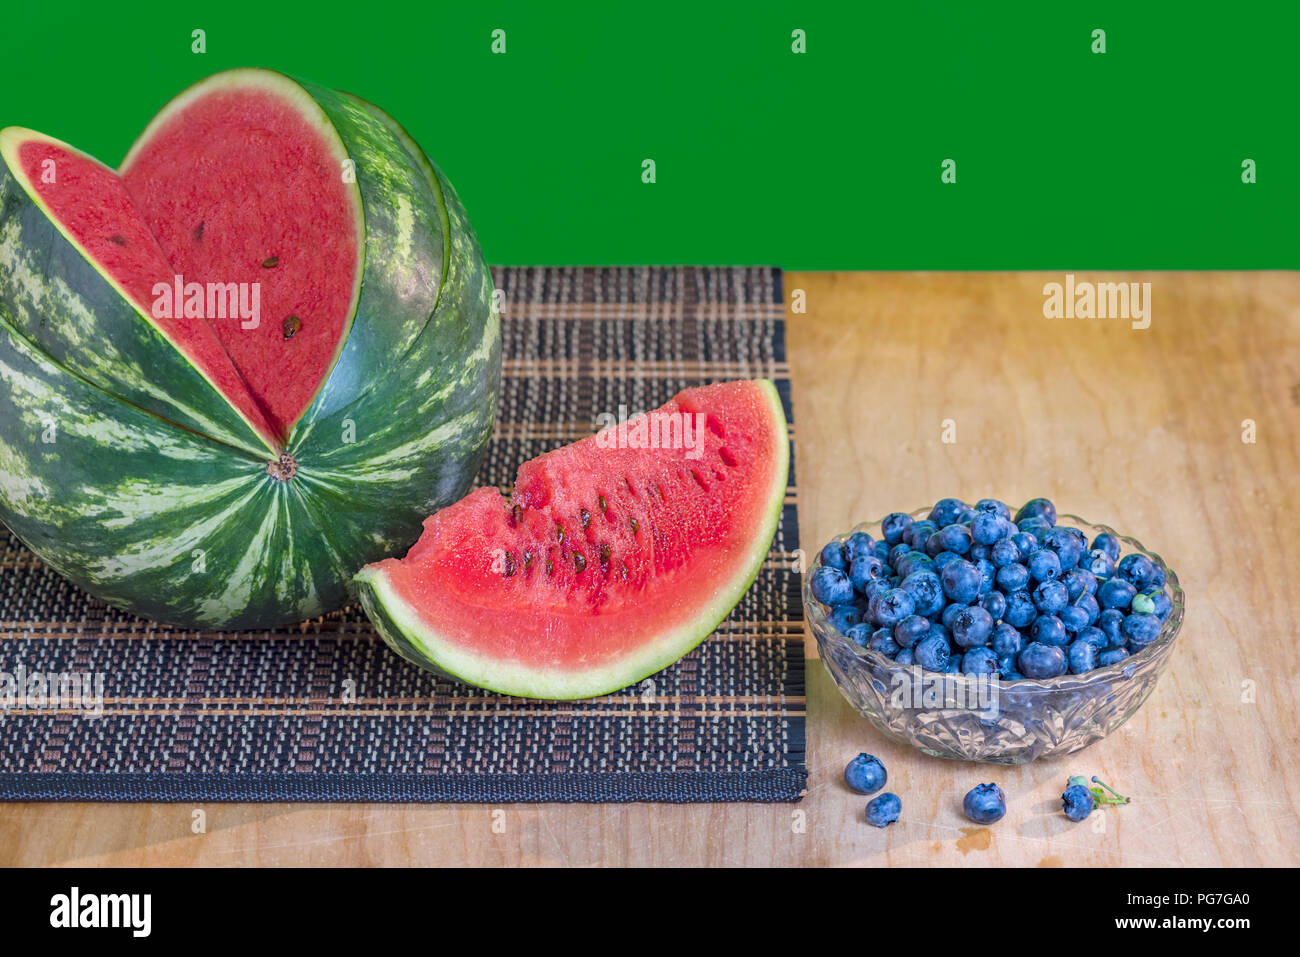 watermelon with red flesh and brown seeds and blueberries in a glass vase, on a wooden board with a wicker napkin, the green background is blurred Stock Photo